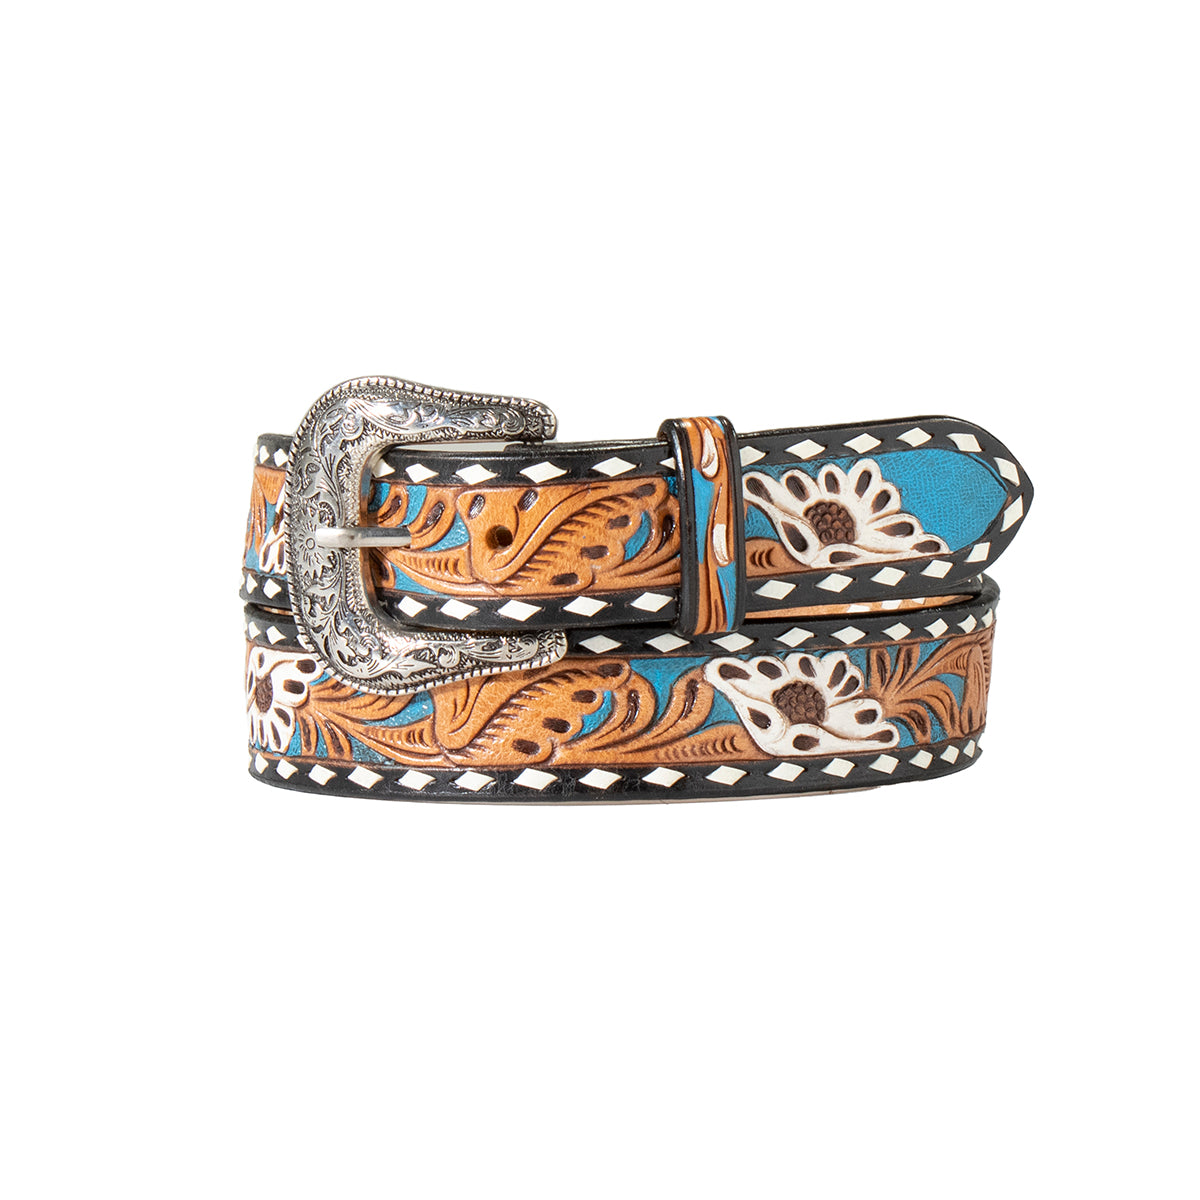 Nocona Women's Hand Tooled Painted Floral Inlay Belt - Blue/Black